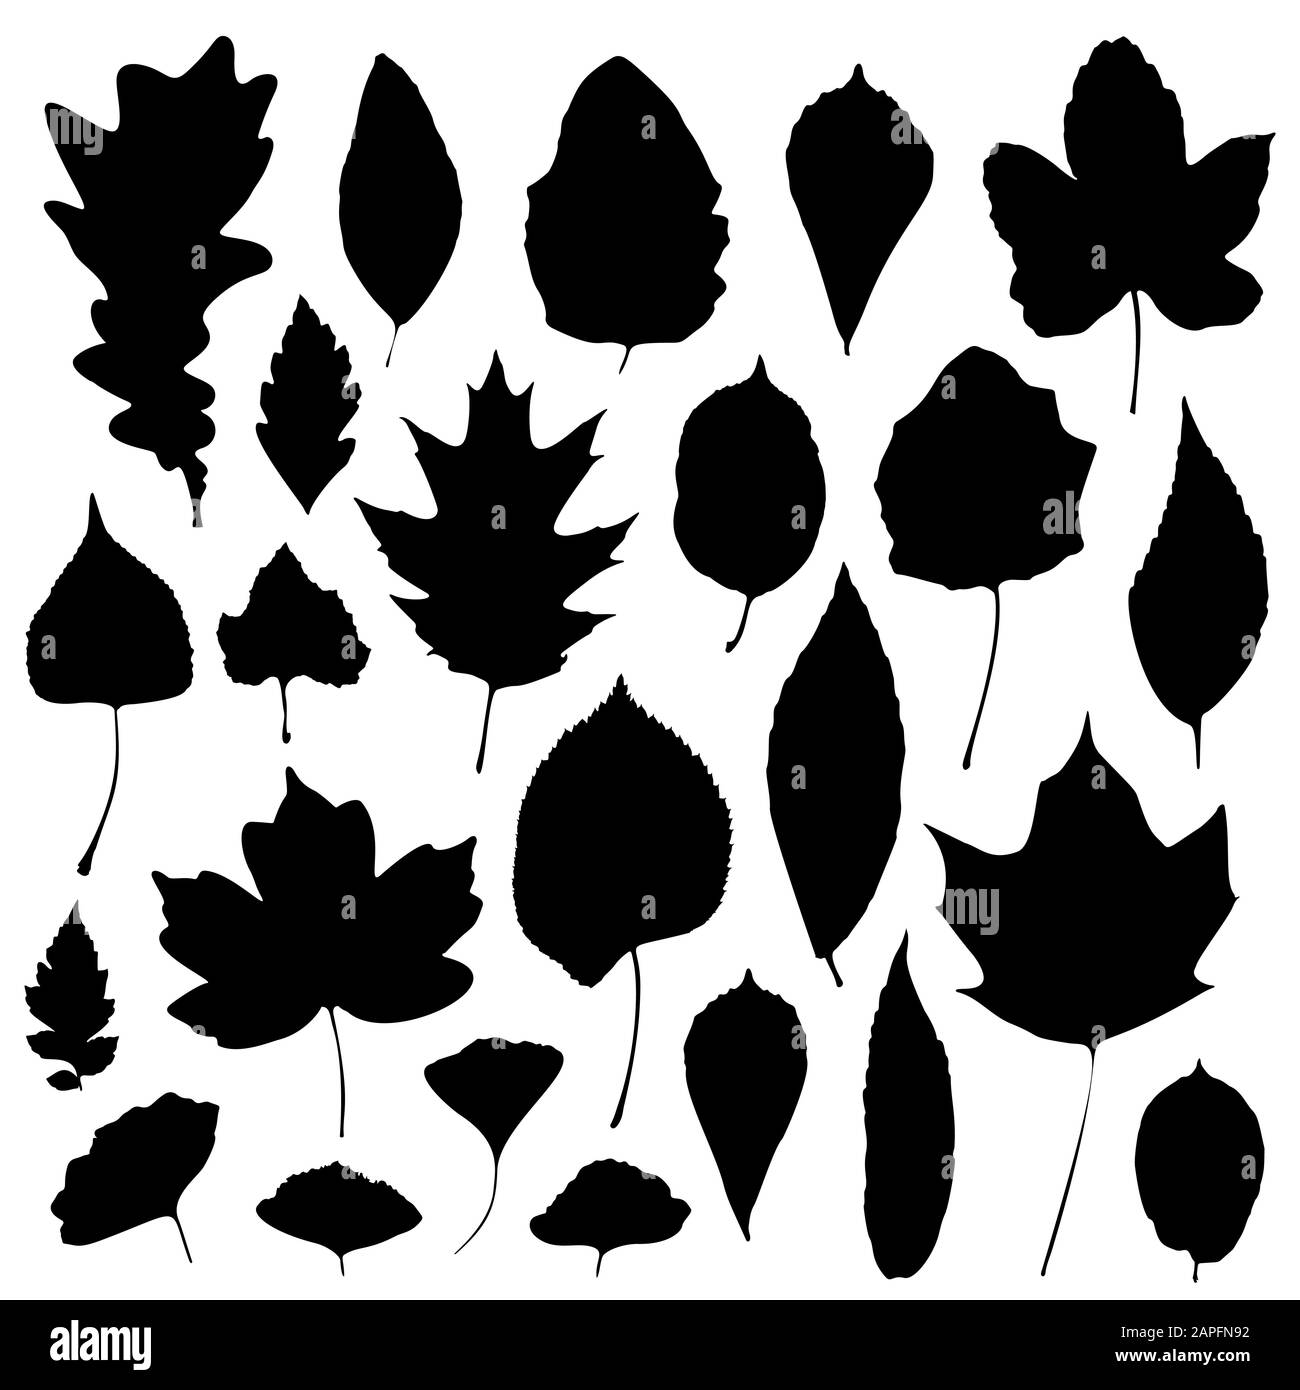 Leaves silhouettes set isolated on white background. Vector ...